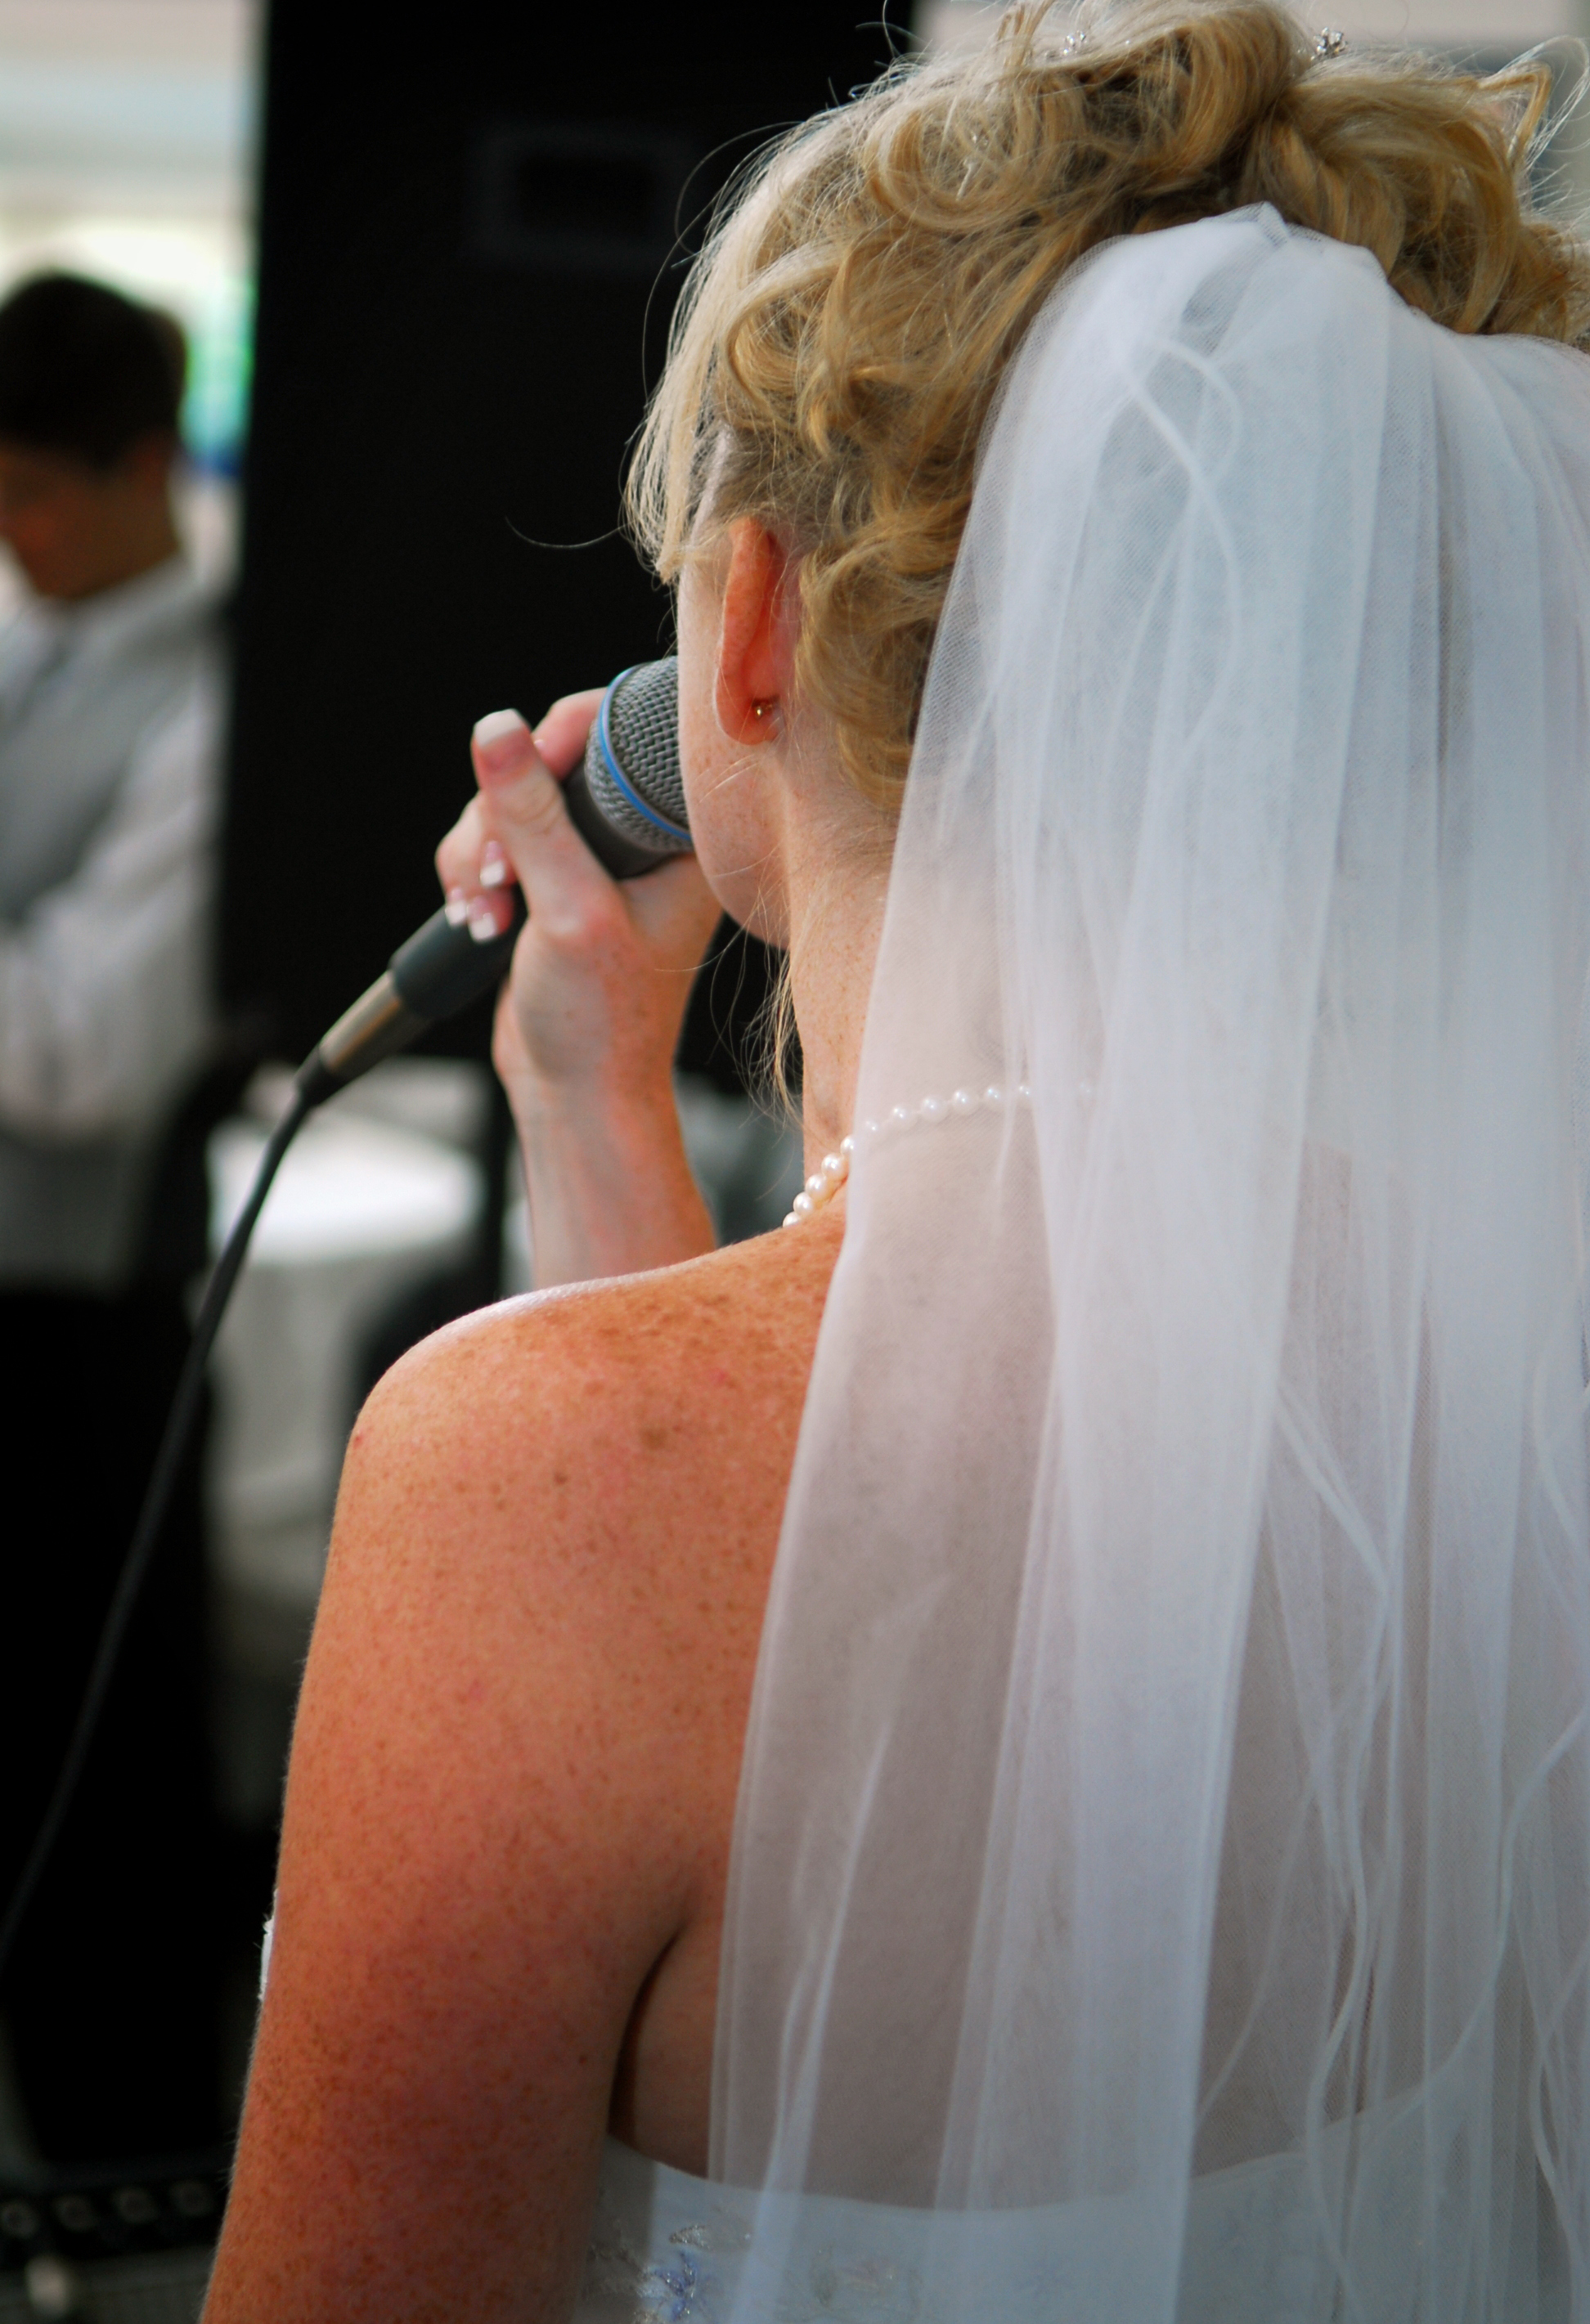 A bride speaking in a microphone | Source: Getty Images